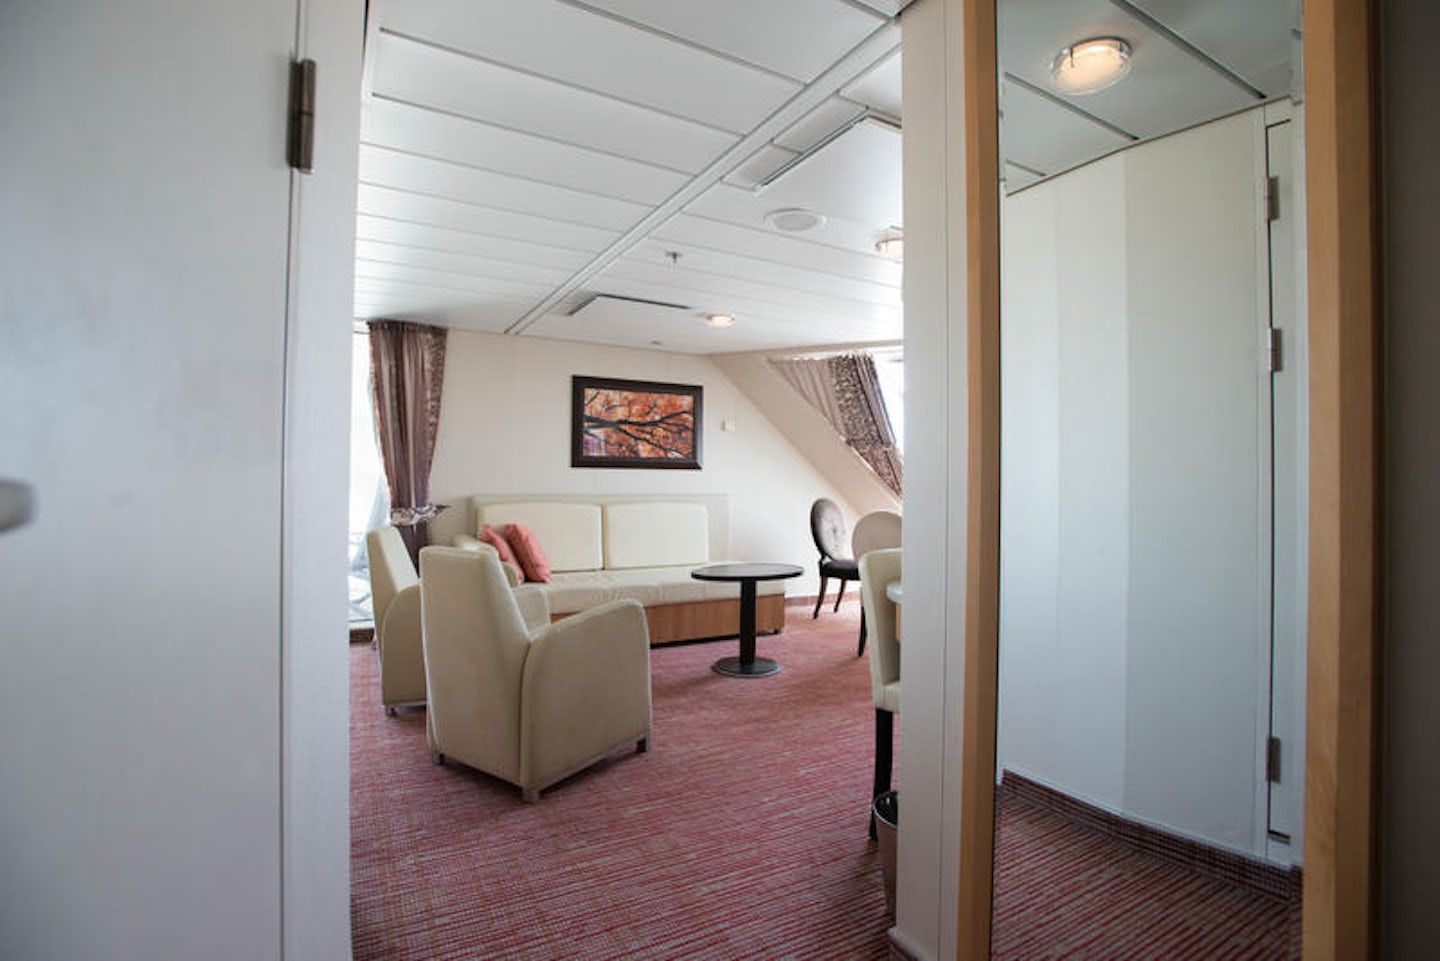 The Family Oceanview Balcony Cabin on Celebrity Eclipse